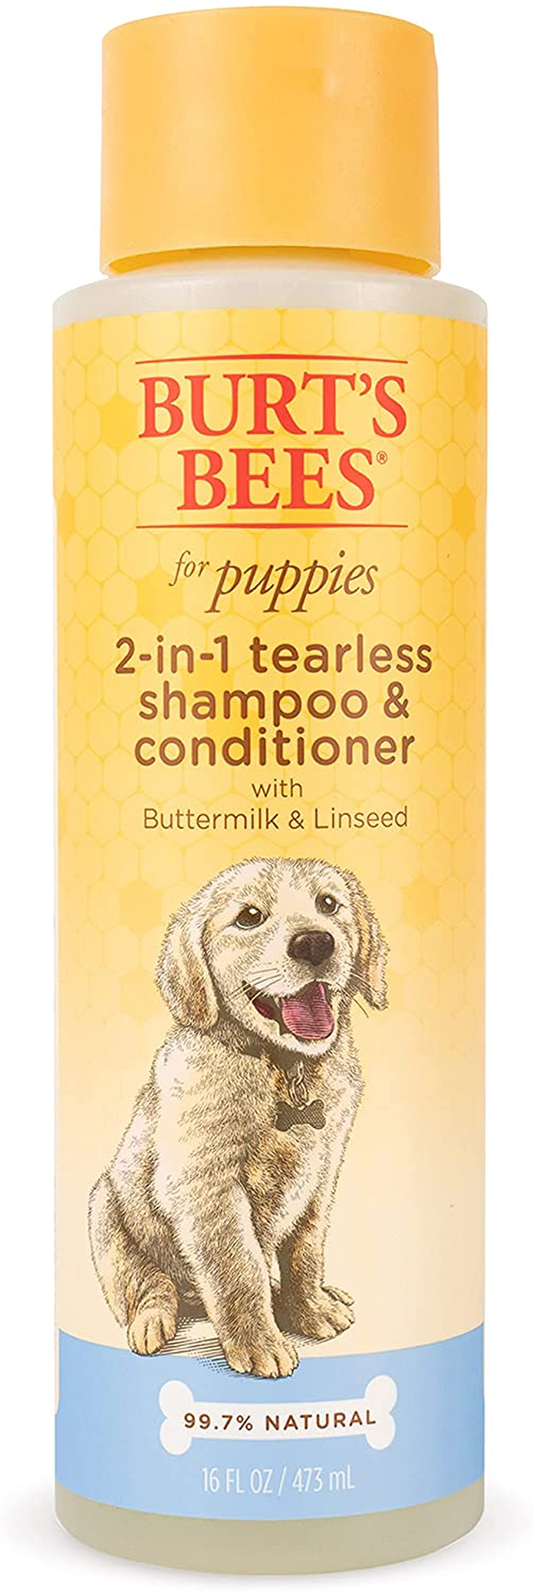 for Dogs 2 in 1 Dog Shampoo & Conditioner, Puppy Supplies, Burts Bees Dog Grooming Supplies, Tearless Dog Shampoo Brush, Dog Wash, Burts Bees Pet Shampoo for Dogs, Dog Conditioner